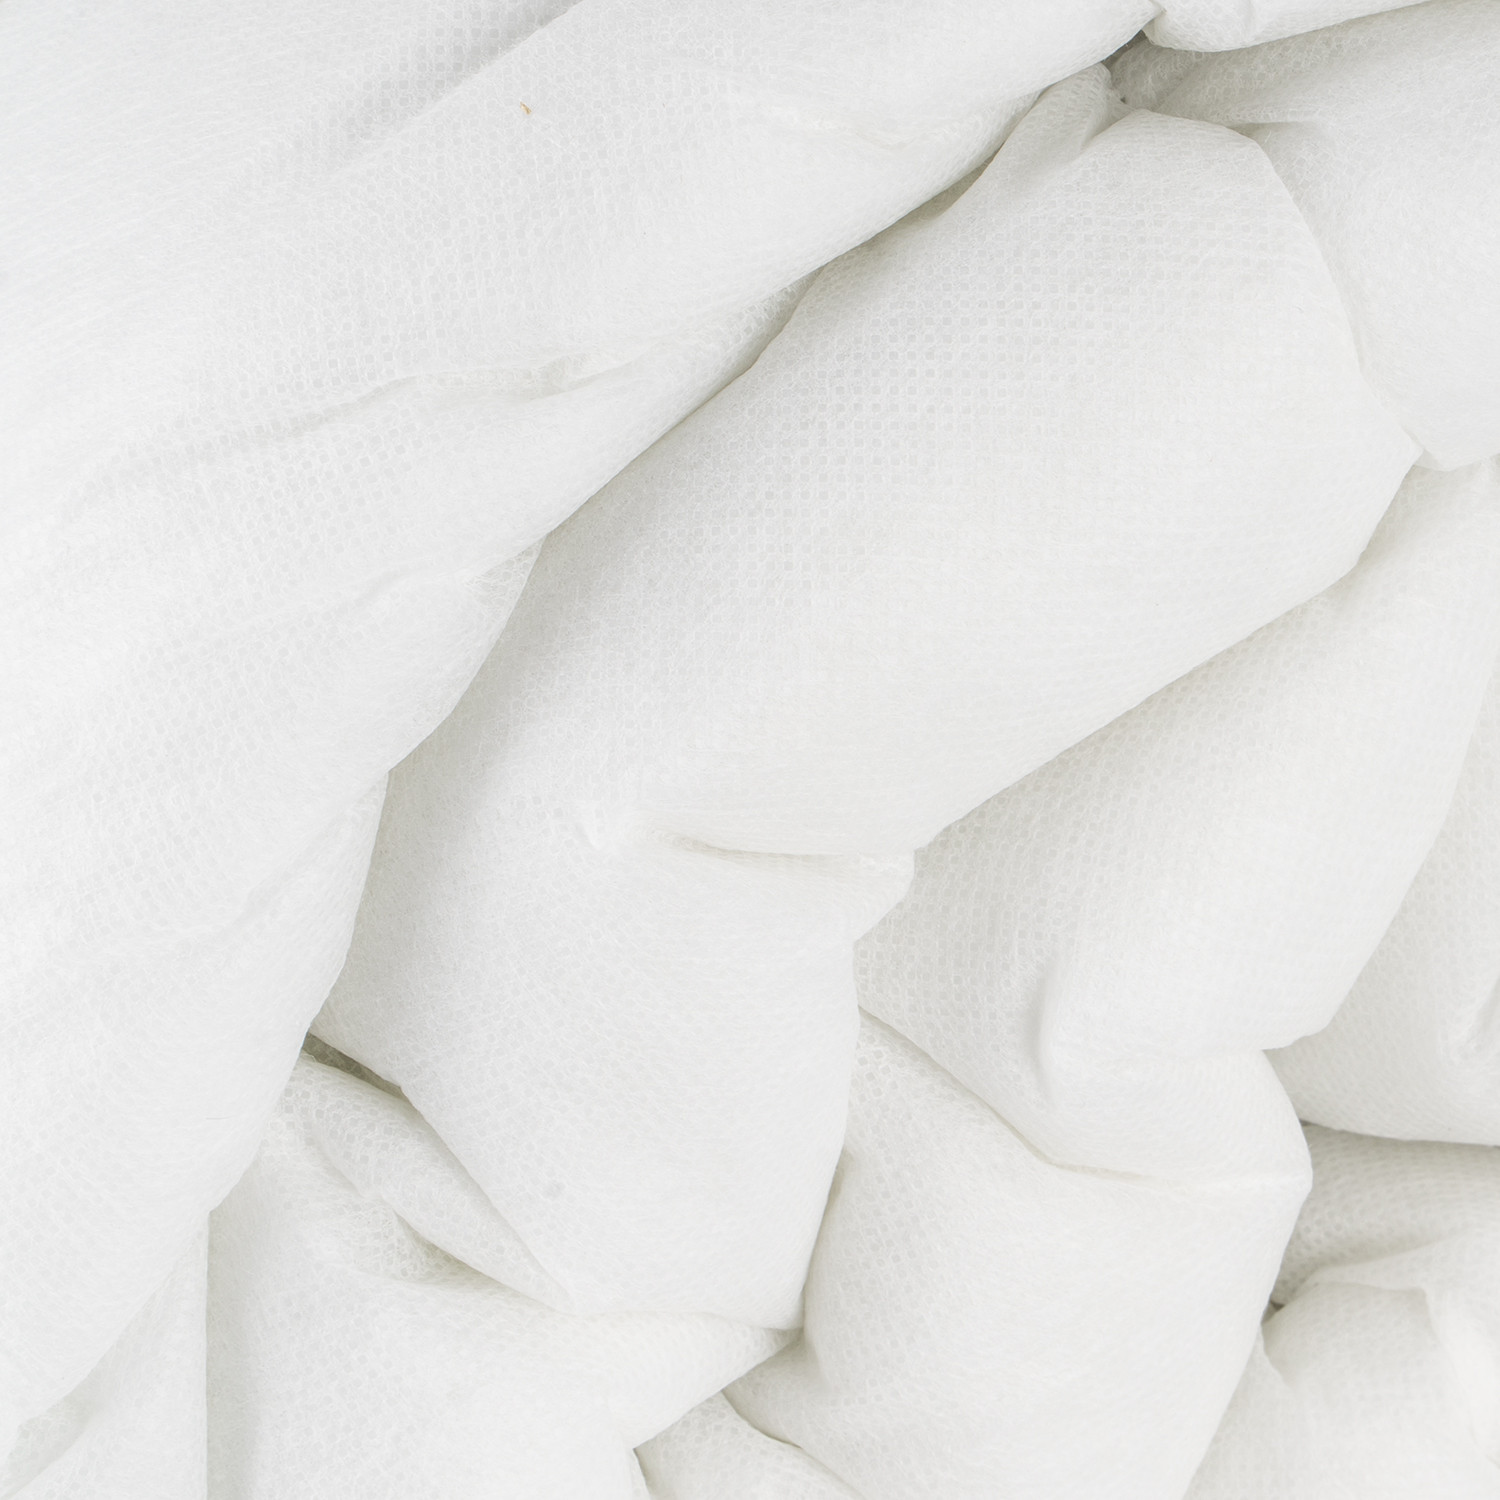 My Home King Size White 10.5 Tog Duvet Cover Image 2